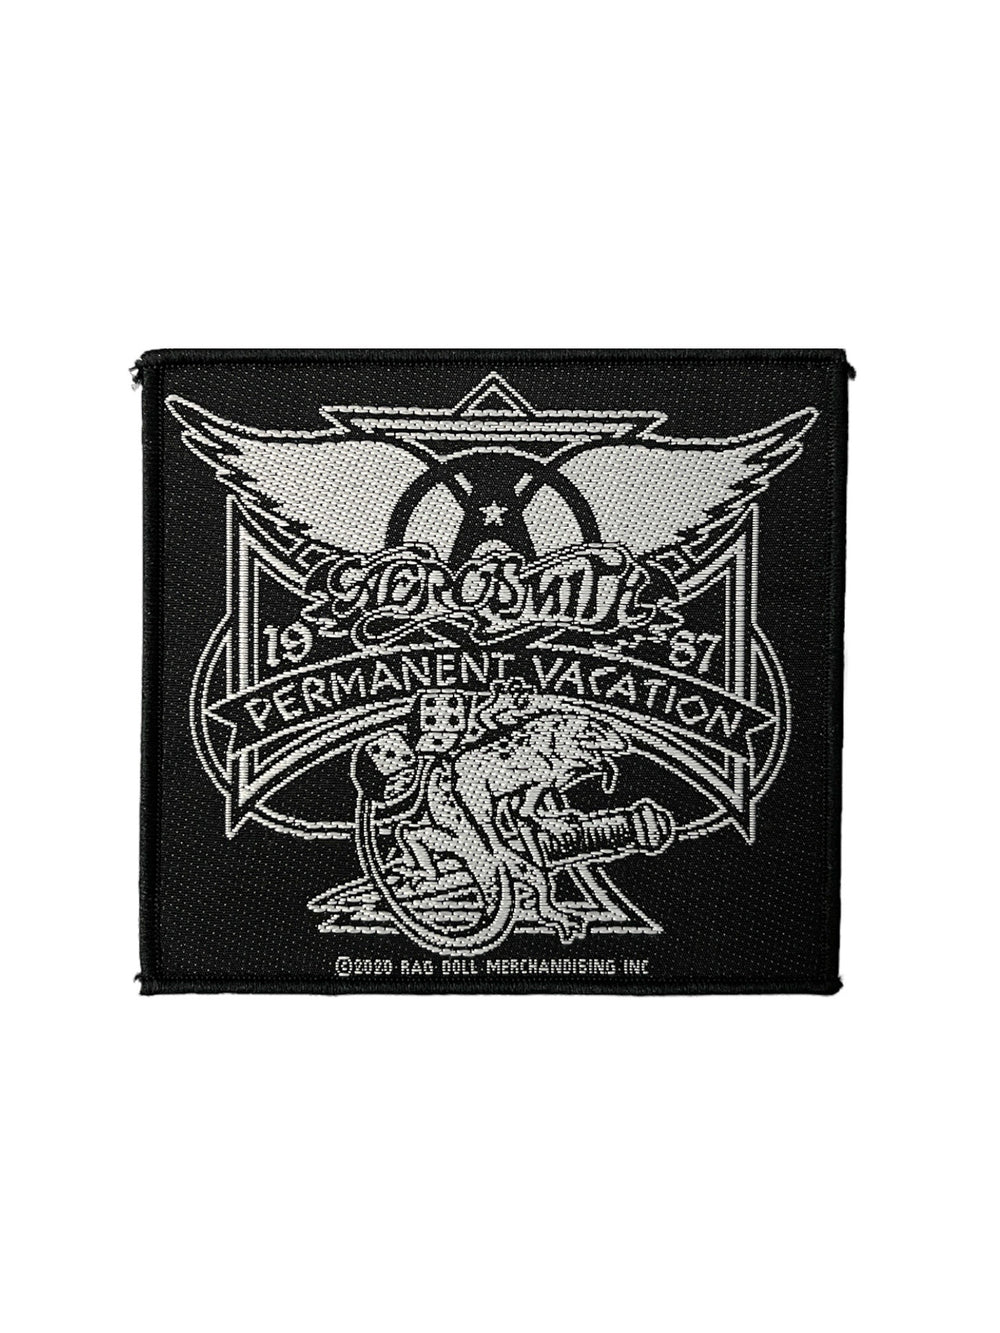 Aerosmith Permanent Vacation Woven Patch Brand New